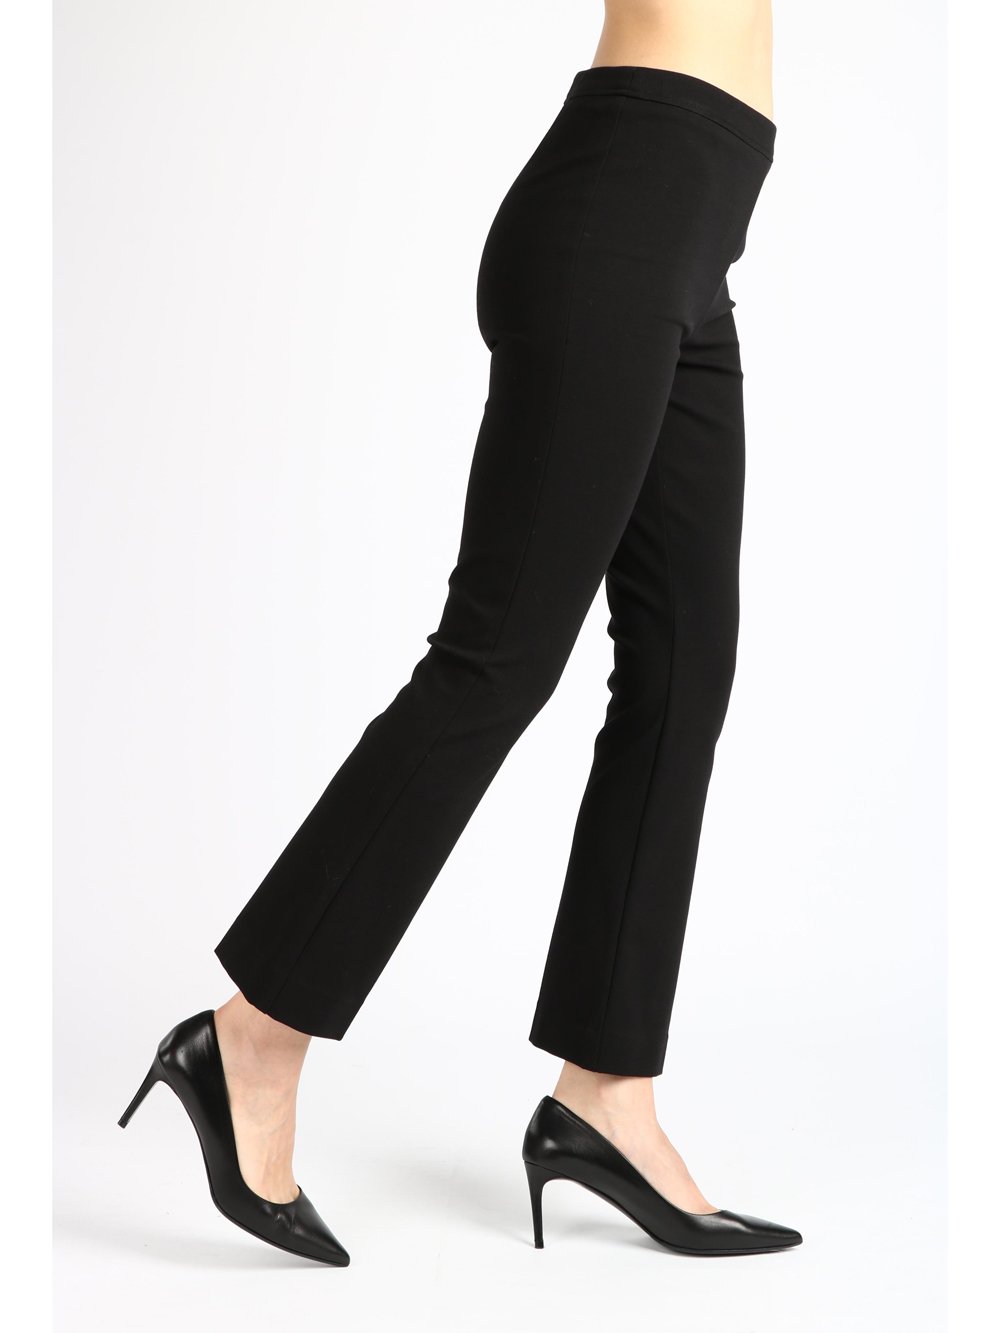 Women's trousers without pockets